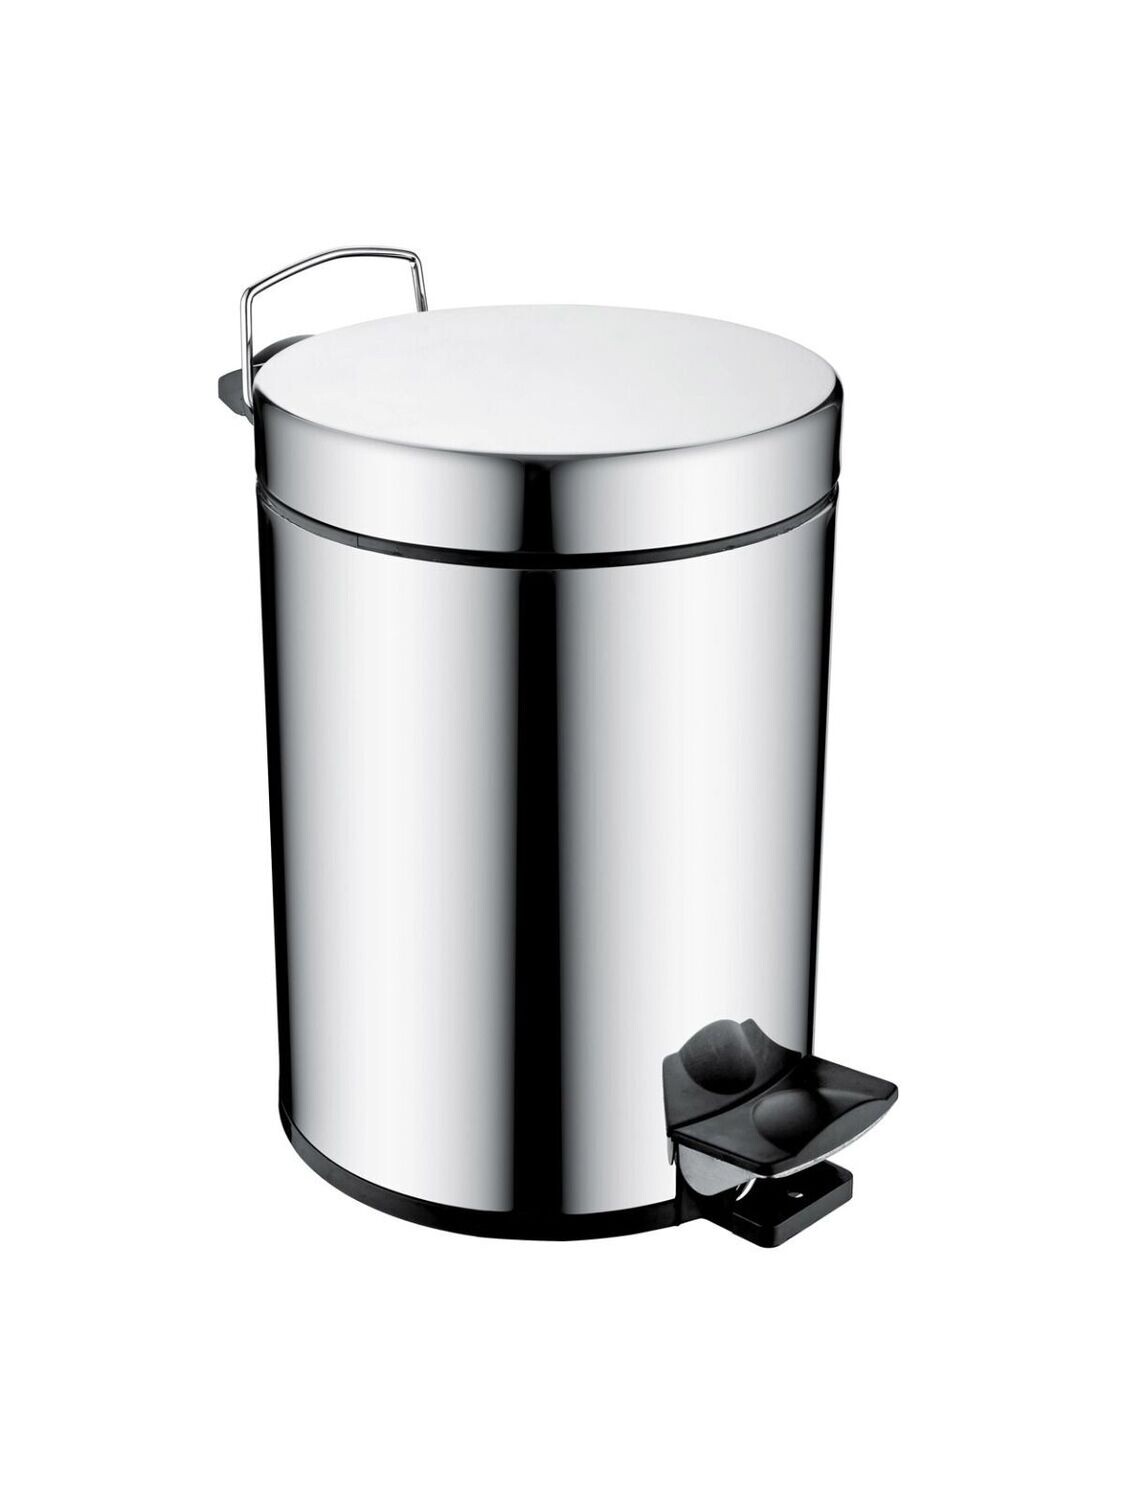 Bon appetit 20L stainless steel Pedal bin Chrome 20L Bathroom, Bedroom, Office, Mini Garbage can with Foot Pedal for Small Space,